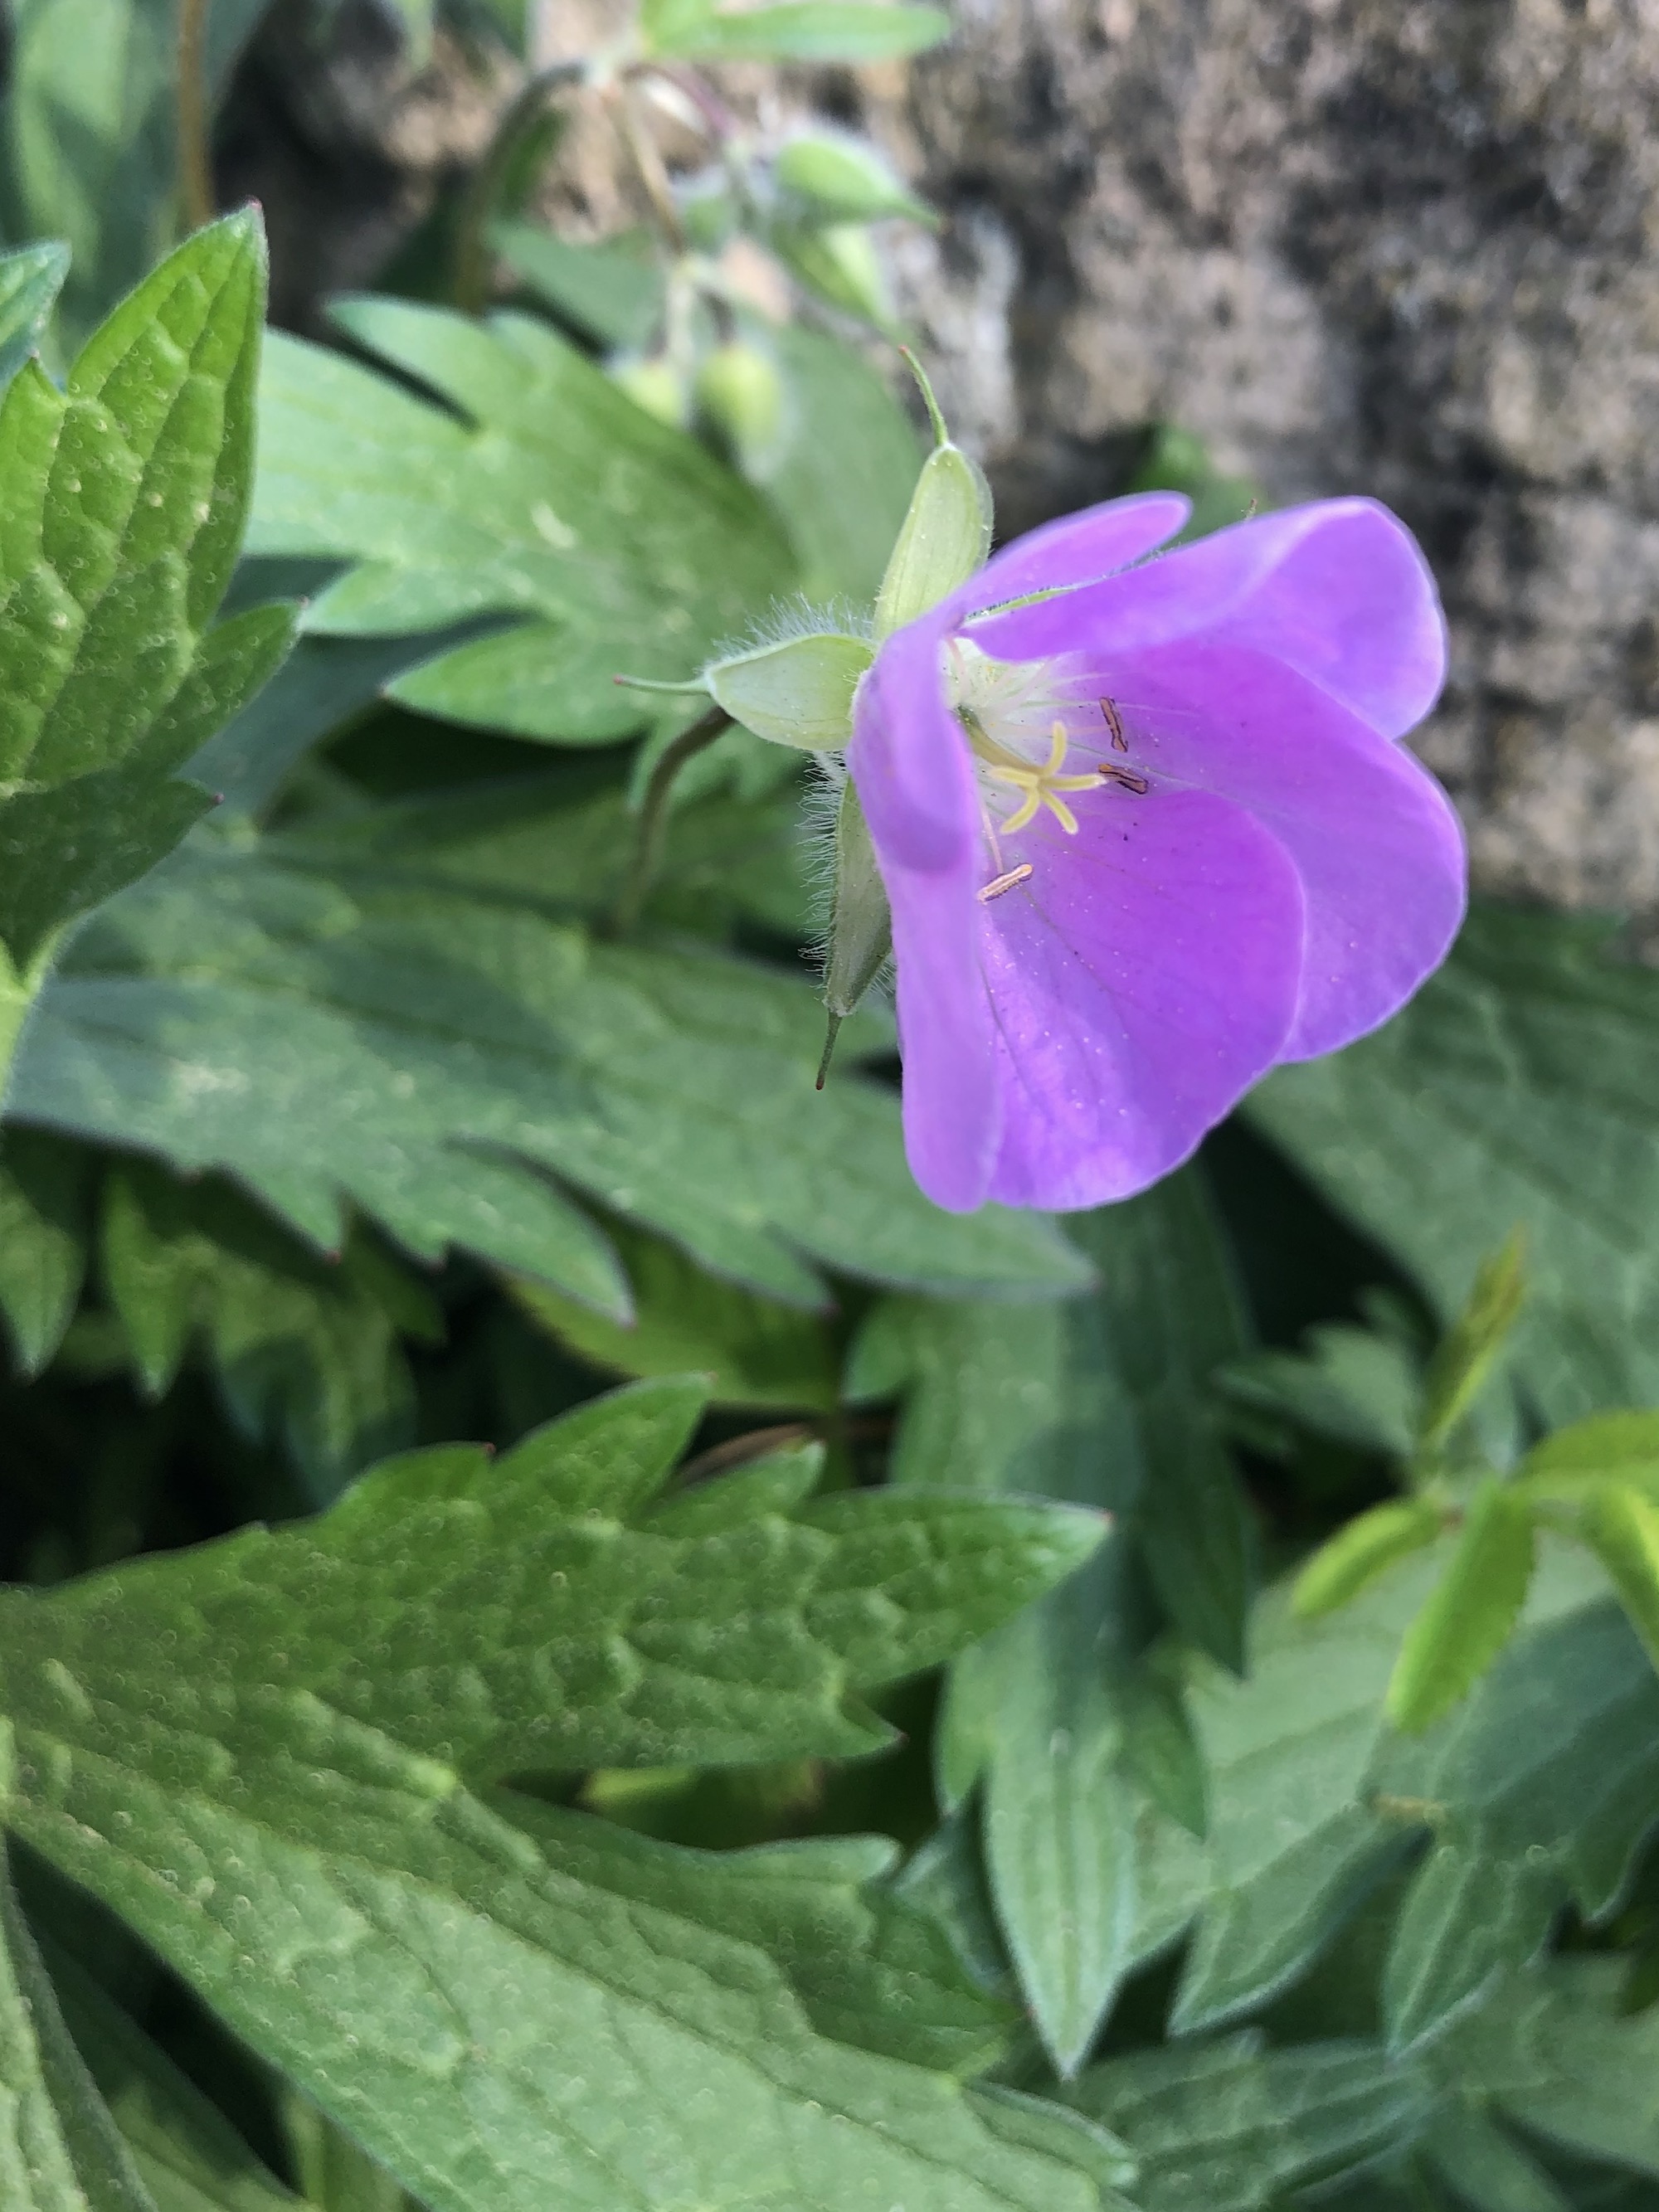 Wild Geranium by Council Ring in Oak Savanna on May 2, 2021.